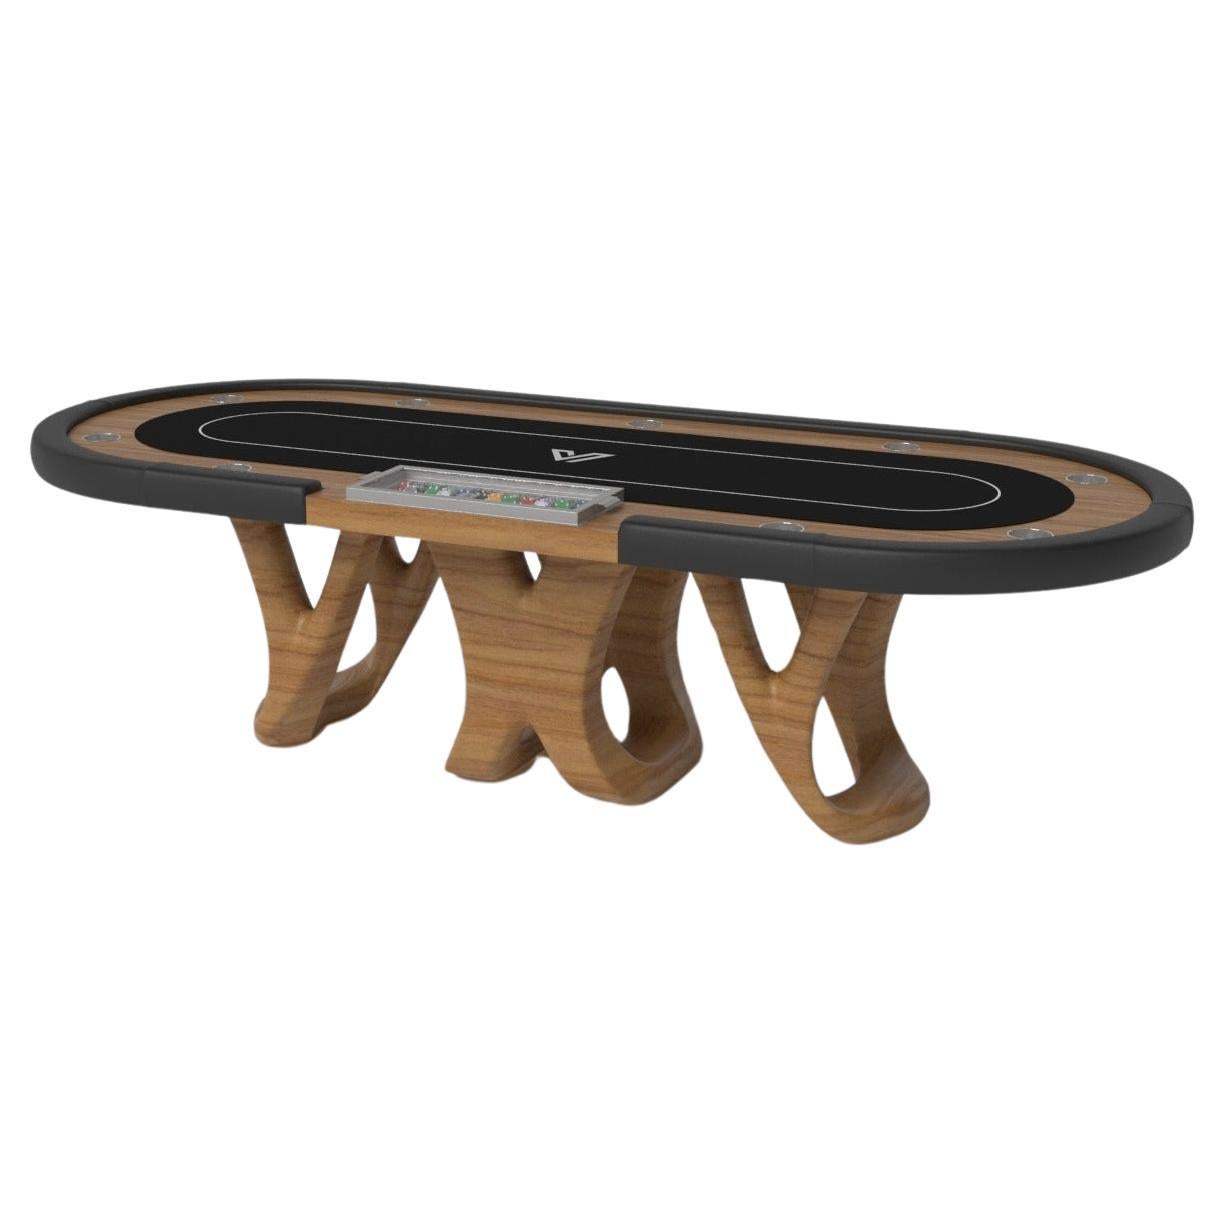 Elevate Customs Draco Poker Tables / Solid Teak Wood in 8'8" - Made in USA For Sale